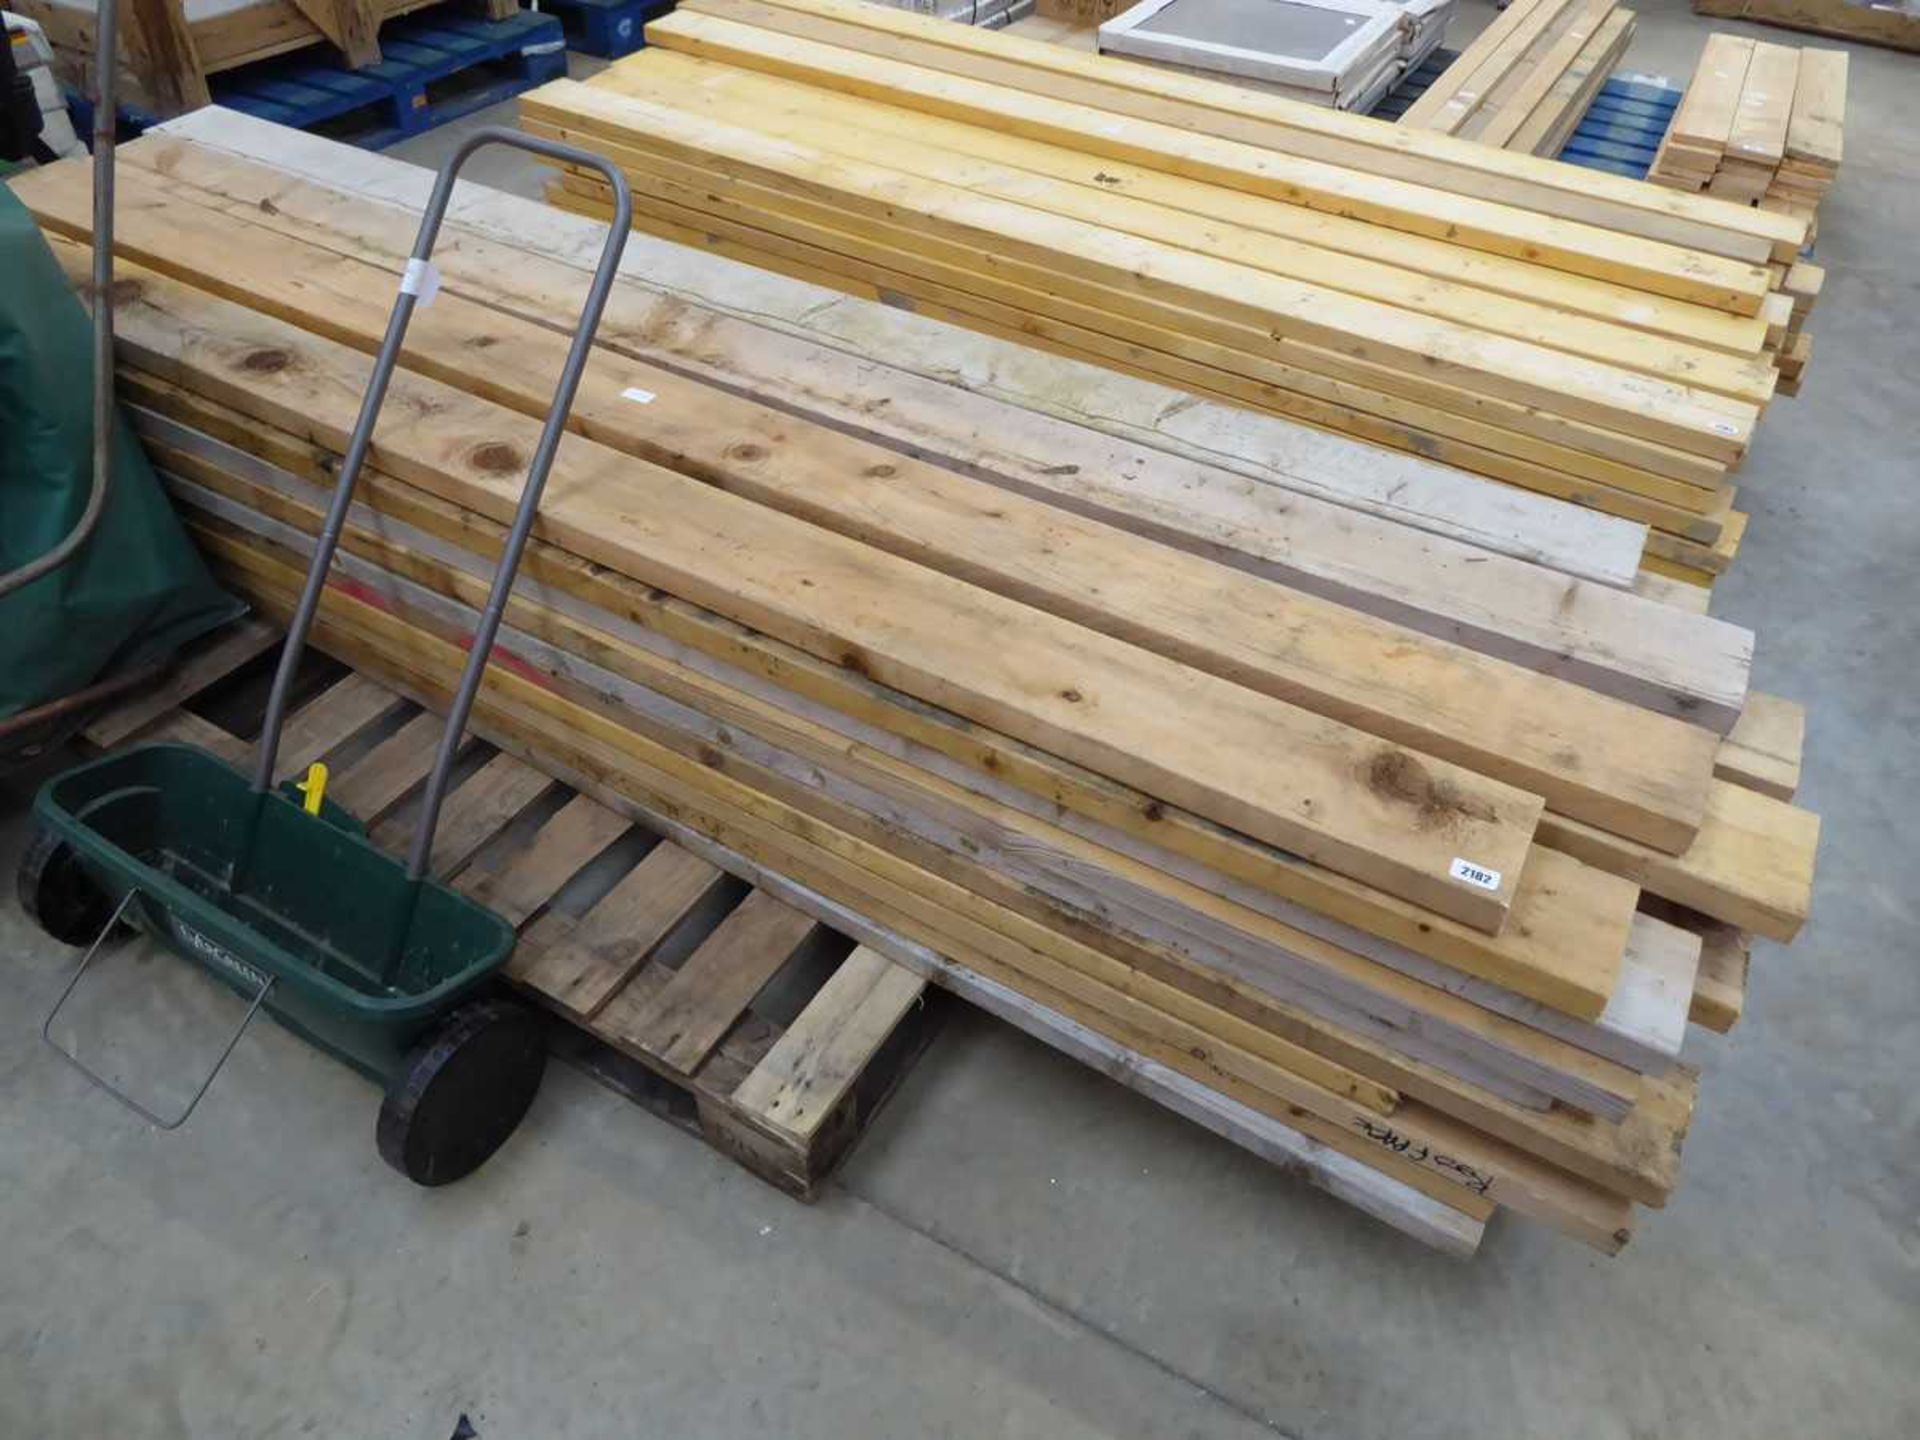 Pallet containing approx. 40 lengths of approx. 7.8' timber lengths